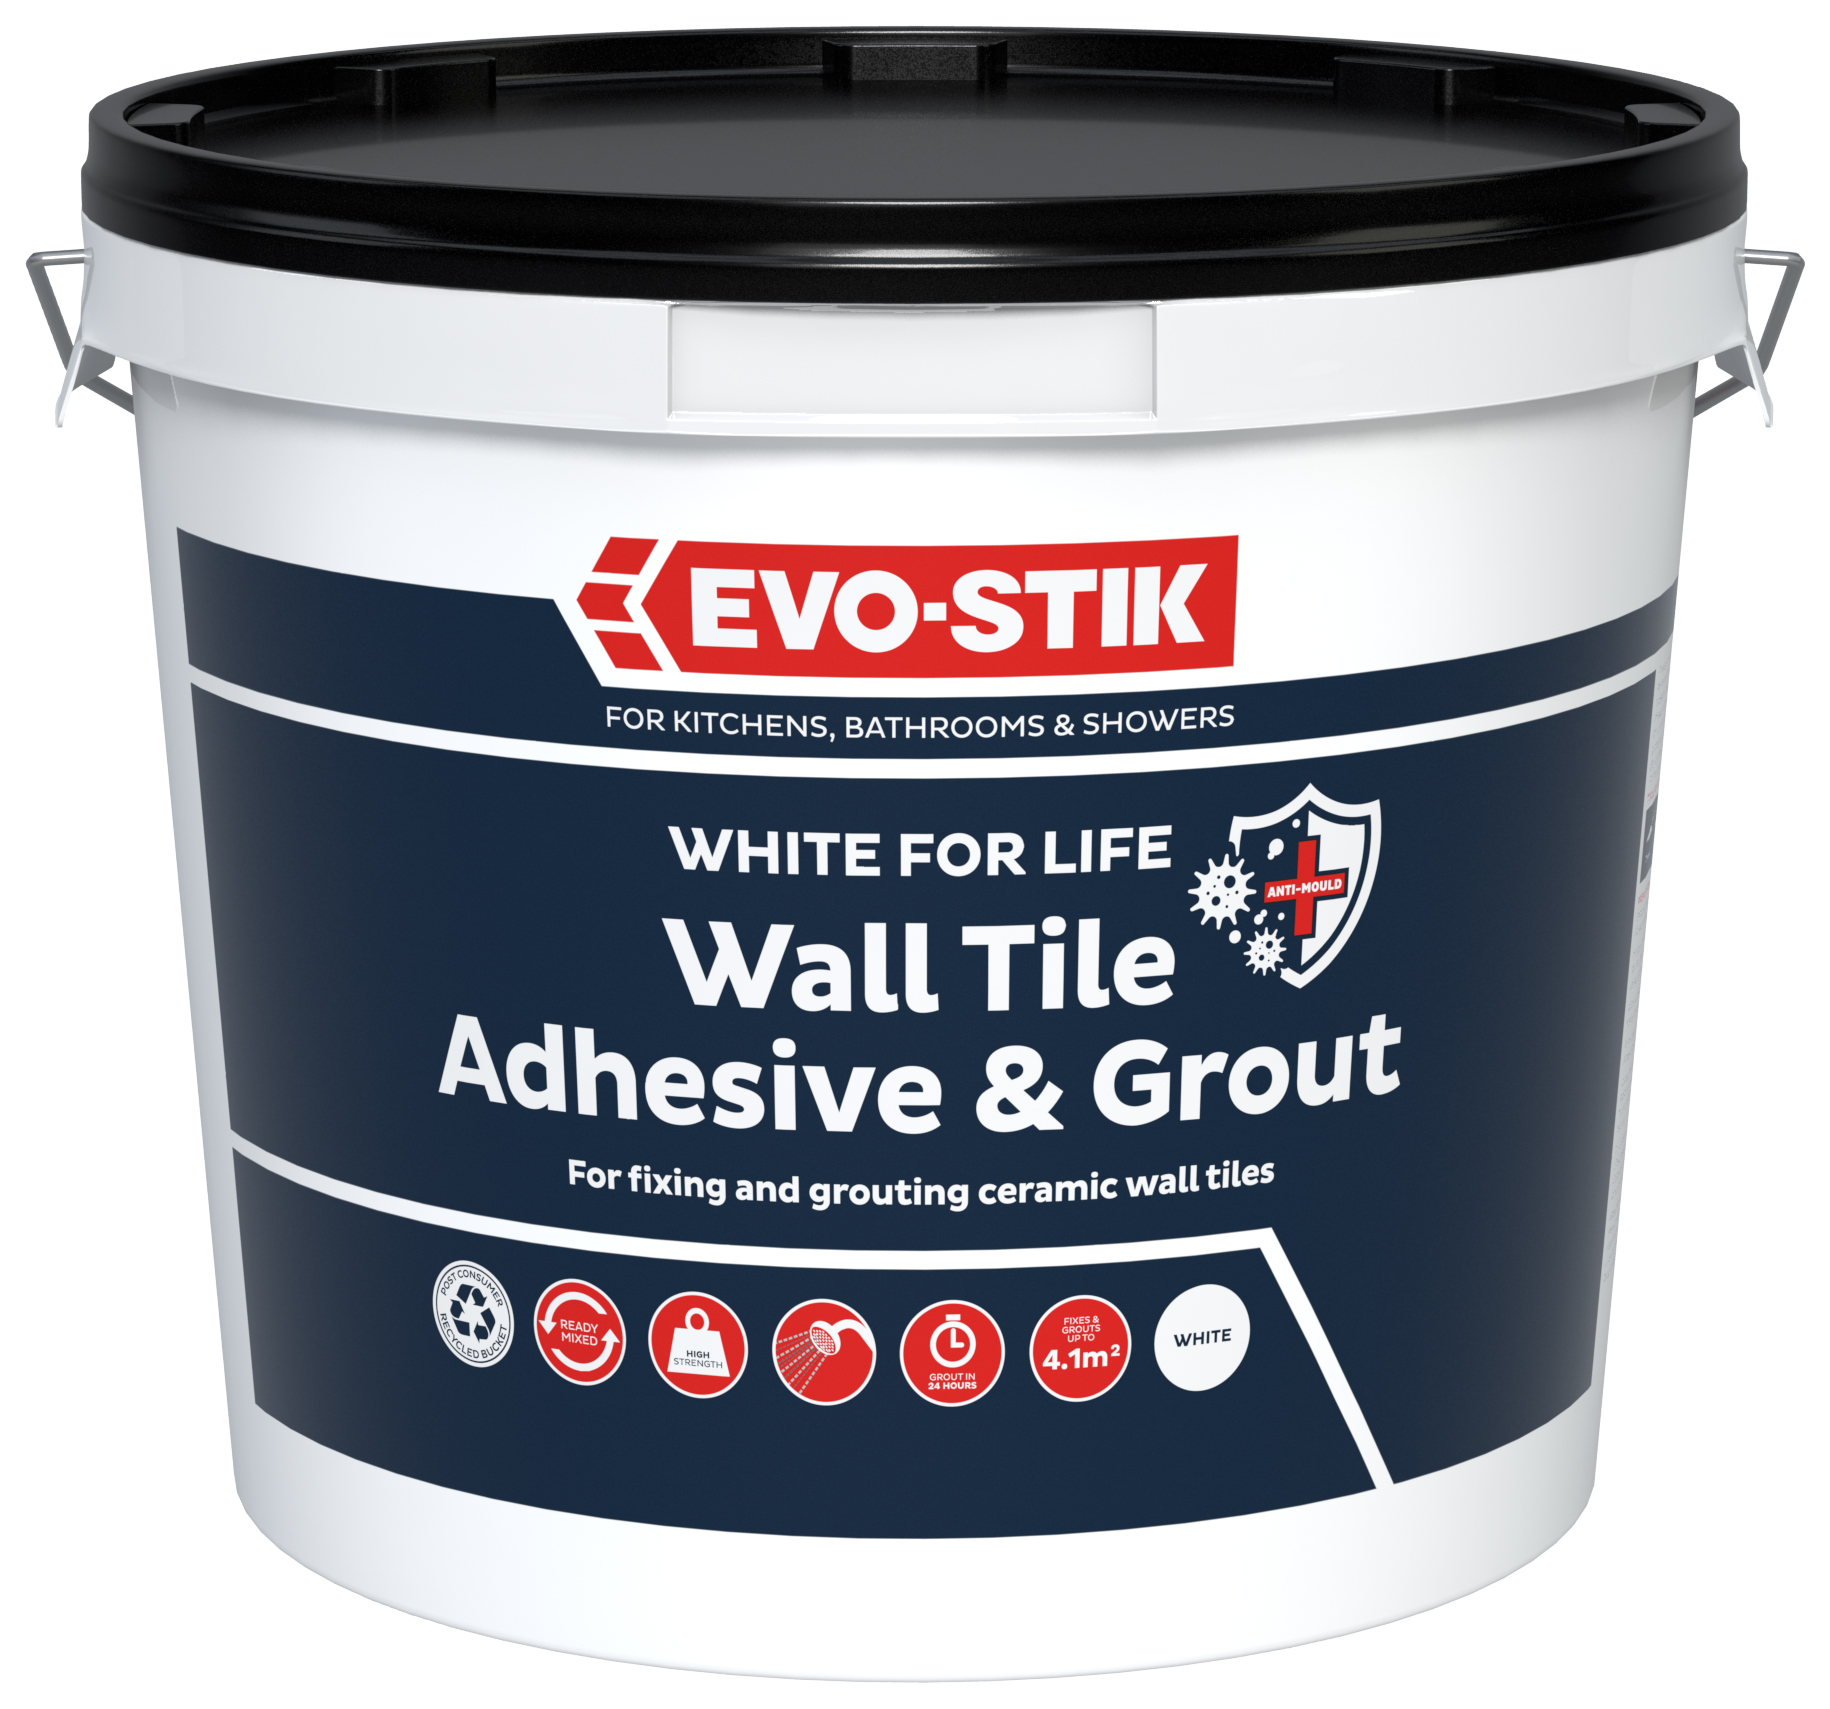 Image of EVO-STIK 5L White for Life Wall Tile Adhesive & Grout - White